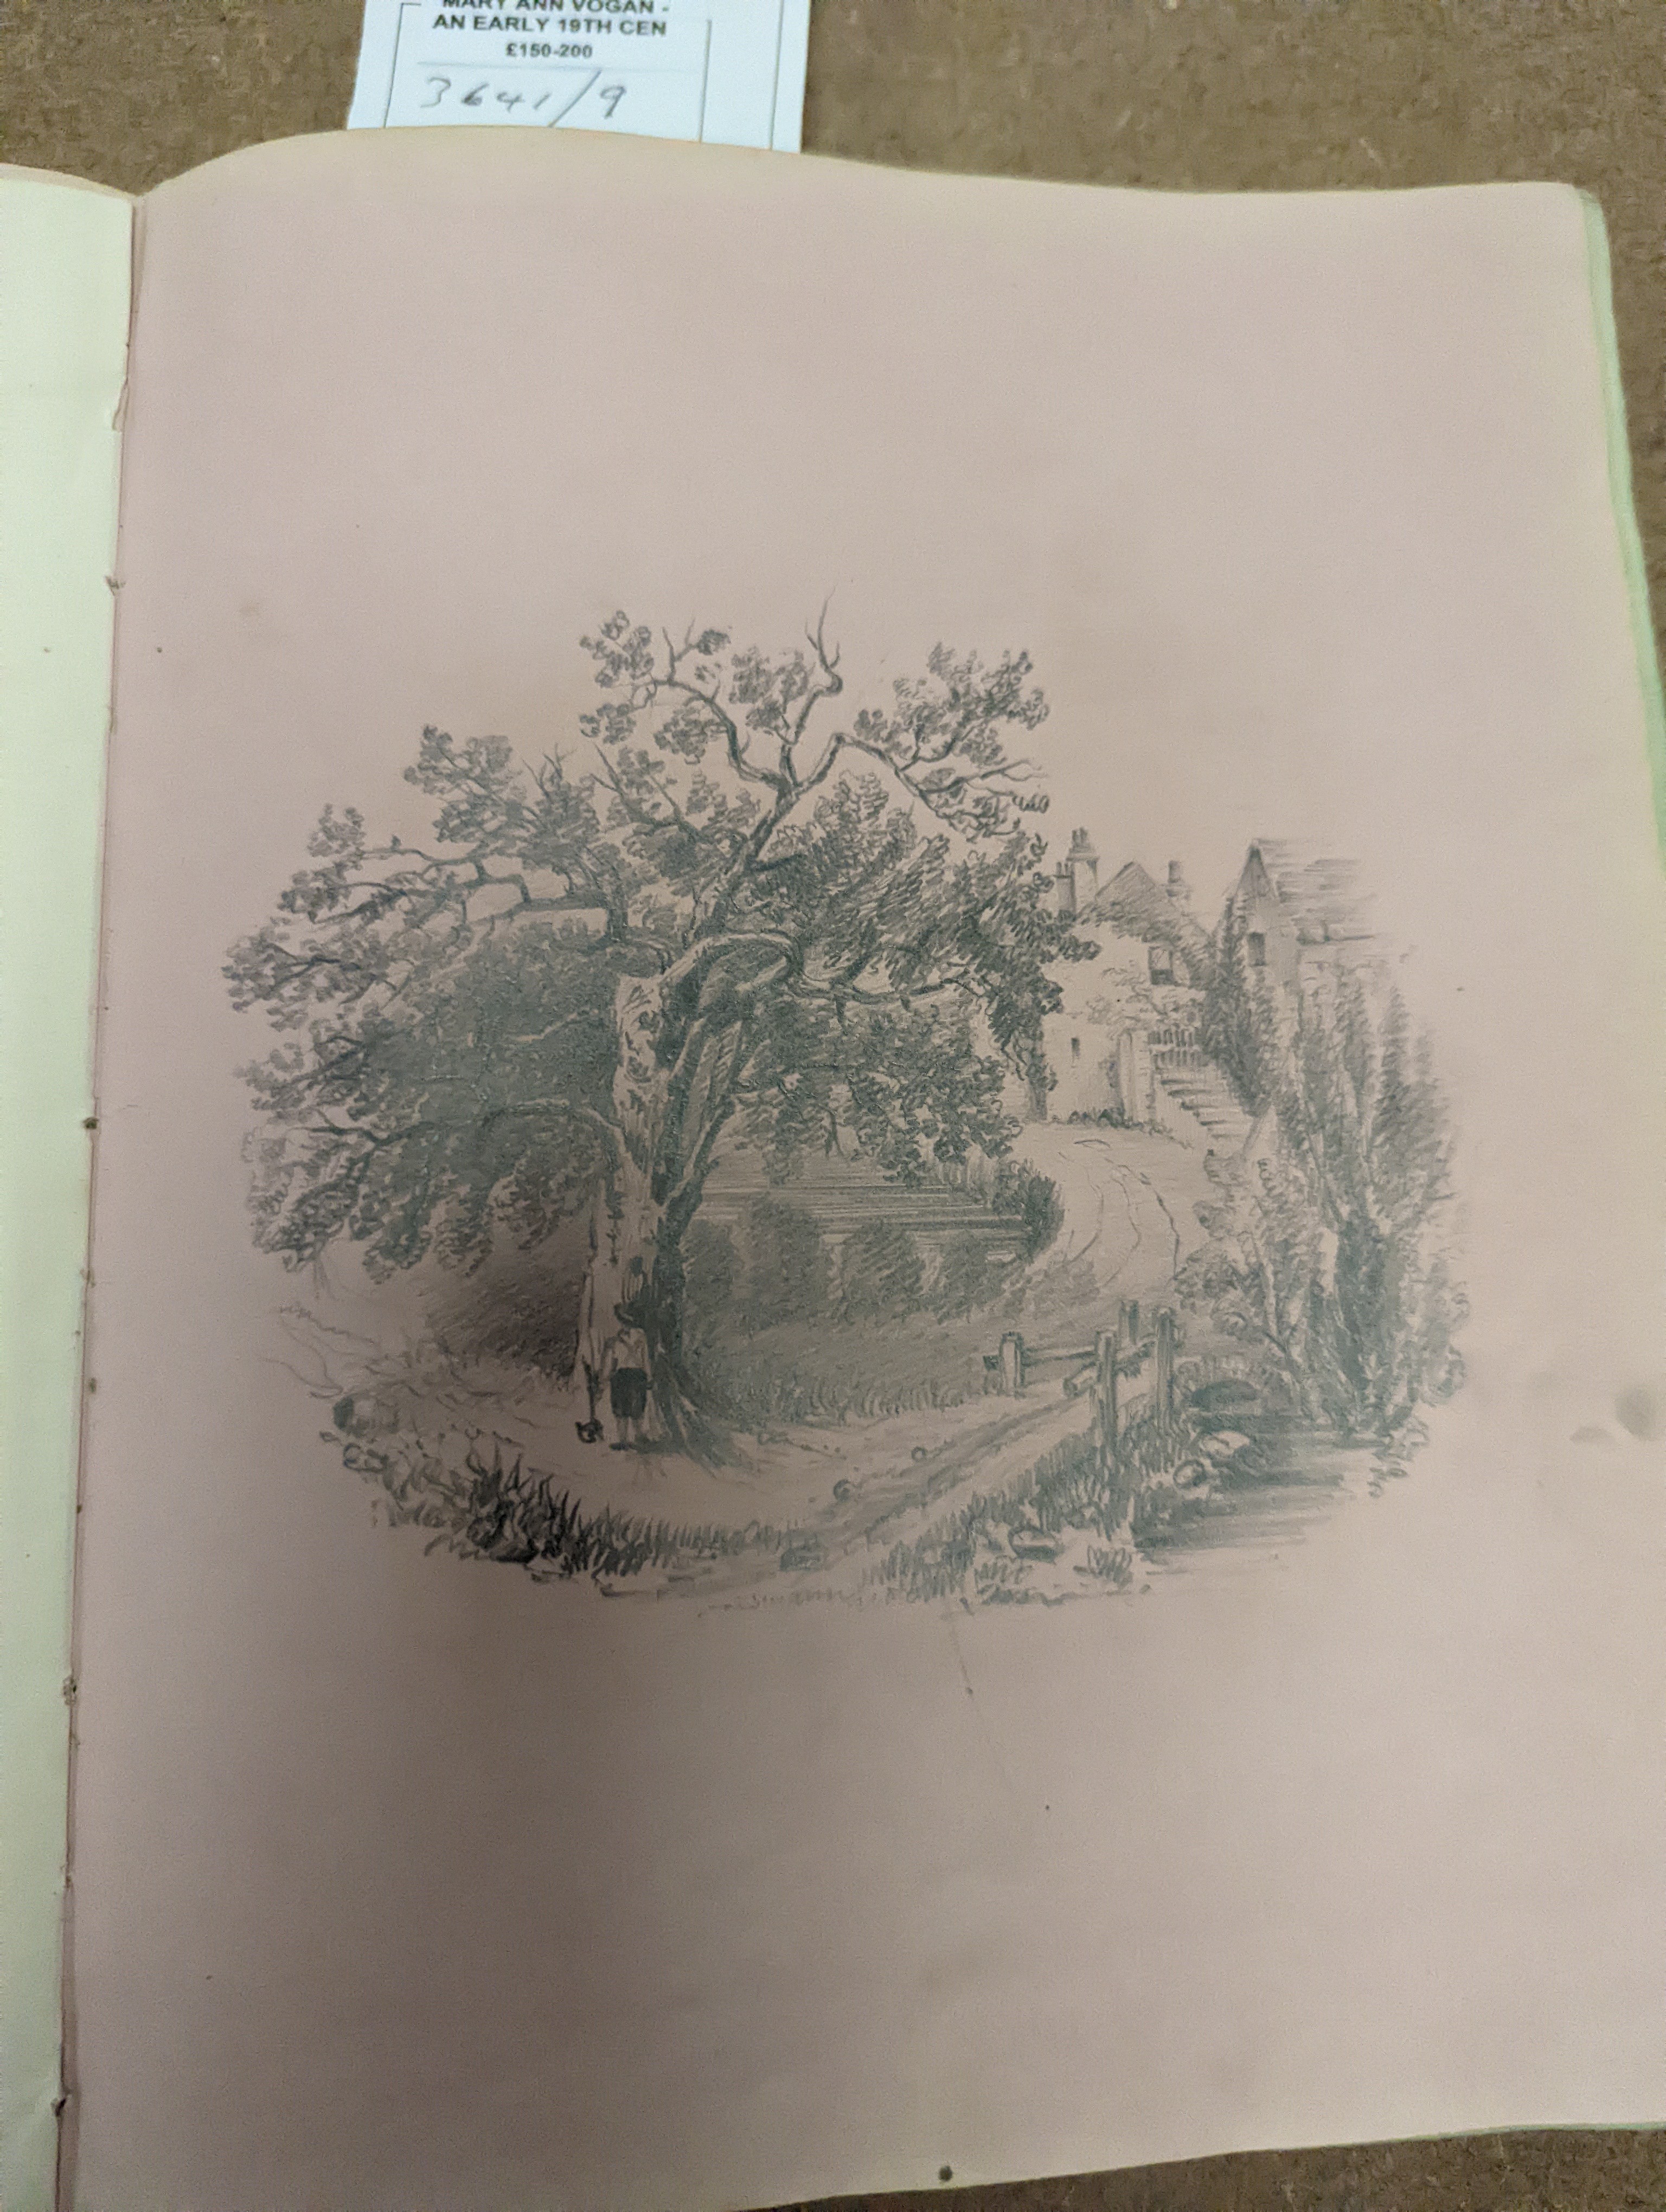 Mary Ann Vogan - an early 19th century album of 60 watercolours, pencil and ink drawings and engravings, including portraits, botanical specimens, land and seascapes, including 3 by R.C. Vogan, the front fly leaf inscrib